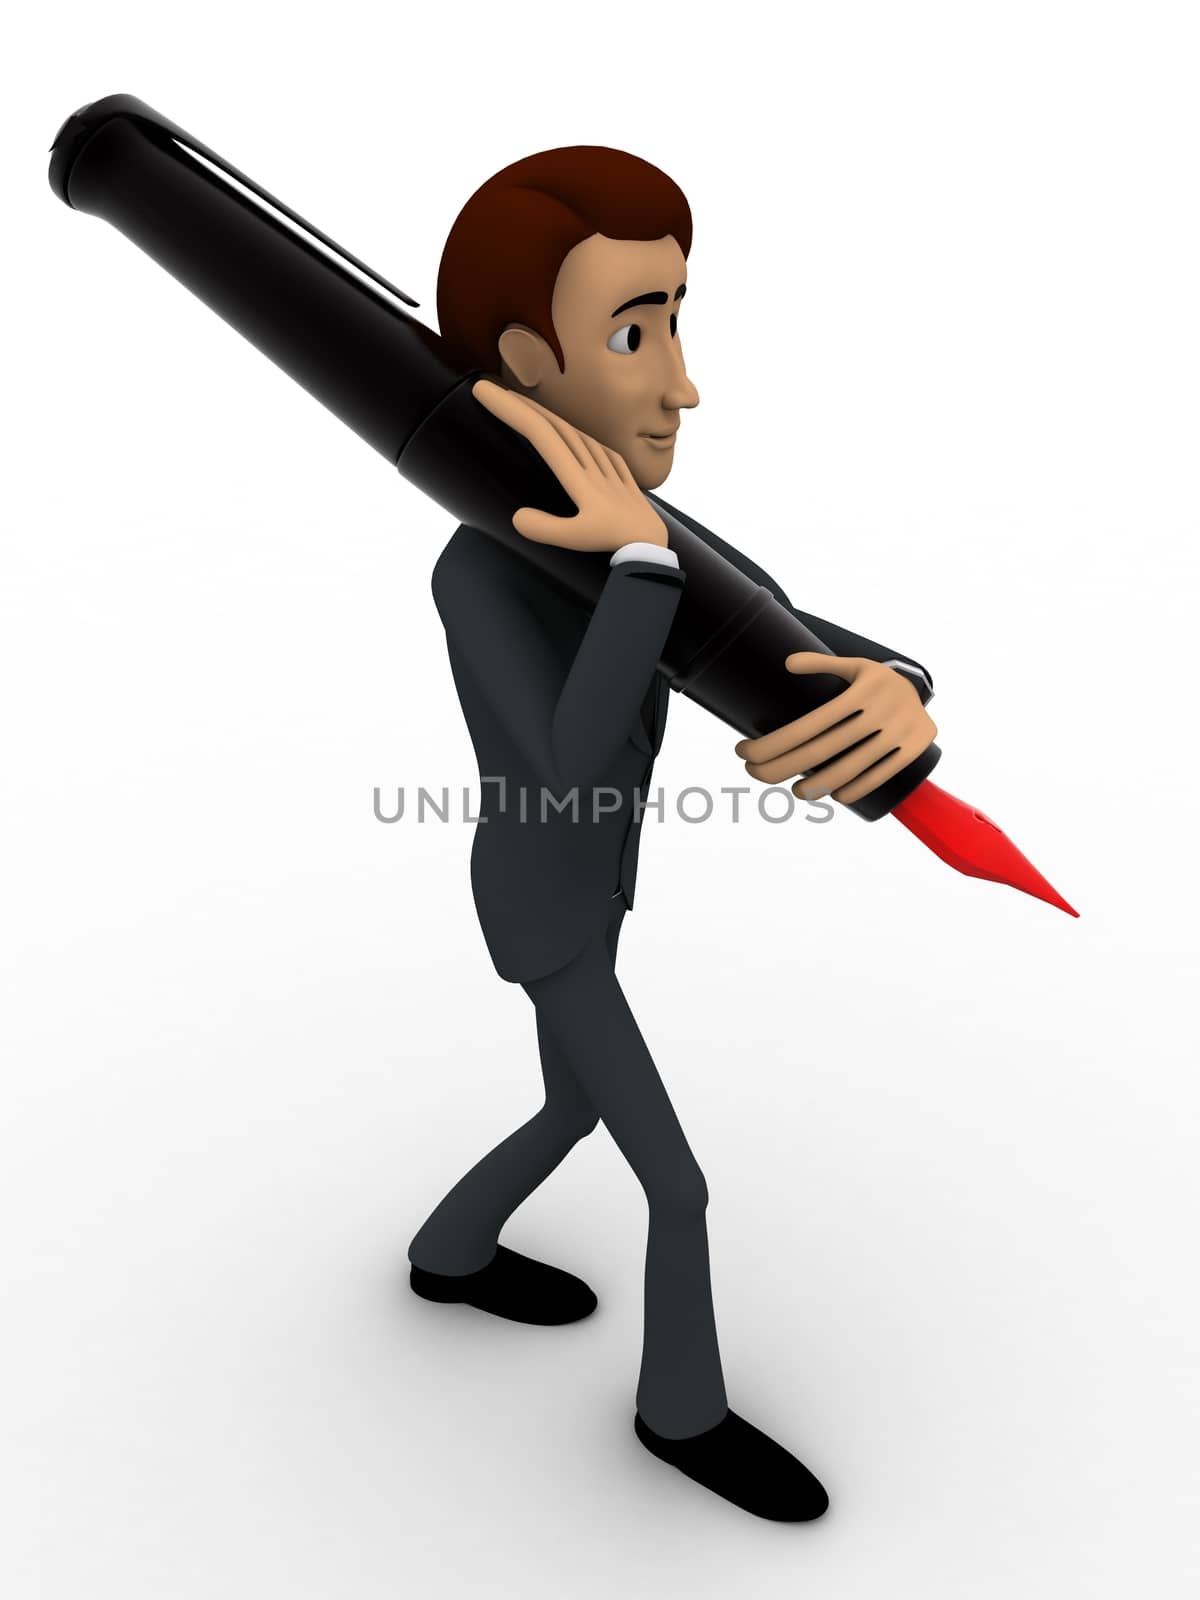 3d man carrying ink pen on shoulder with red knob concept on white background, front angle view